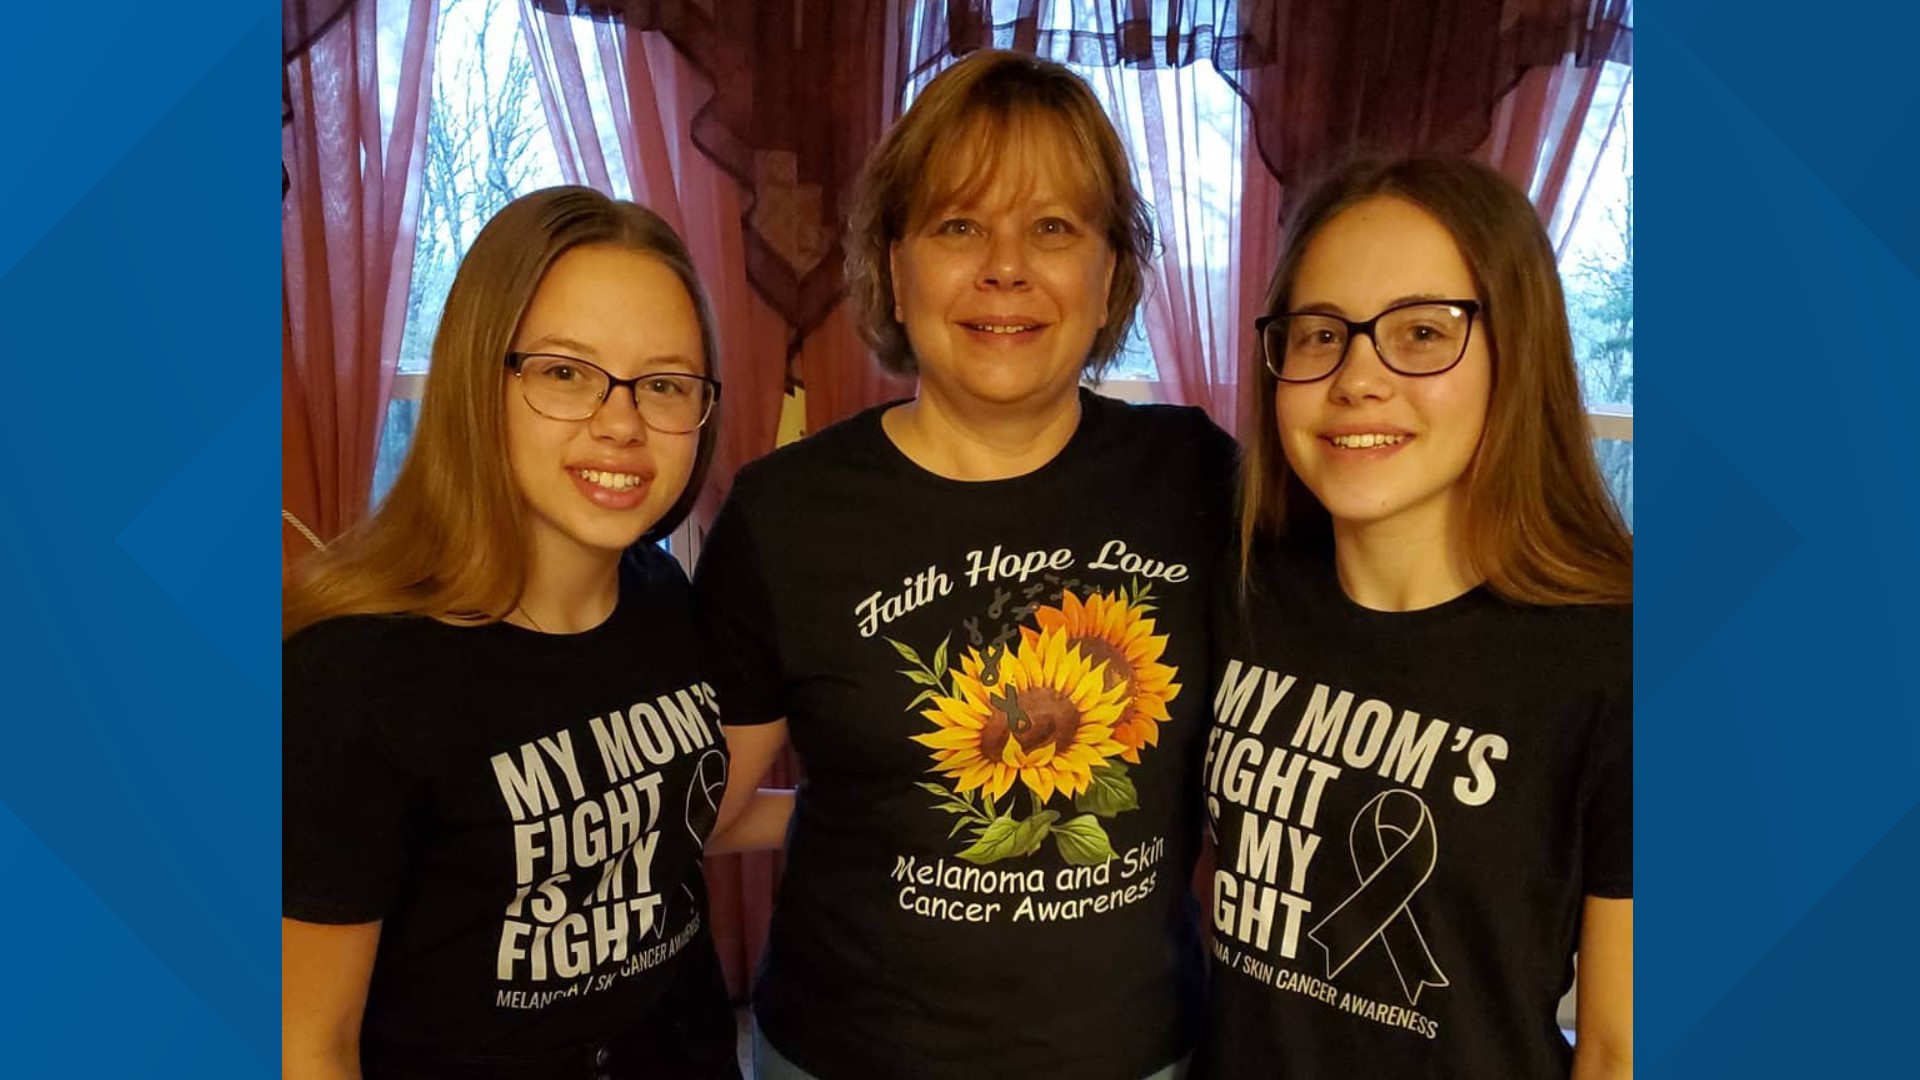 Lather up, with SPF that is. It's the message from a mom of three from Luzerne County who learned the hard way after being diagnosed with skin cancer.